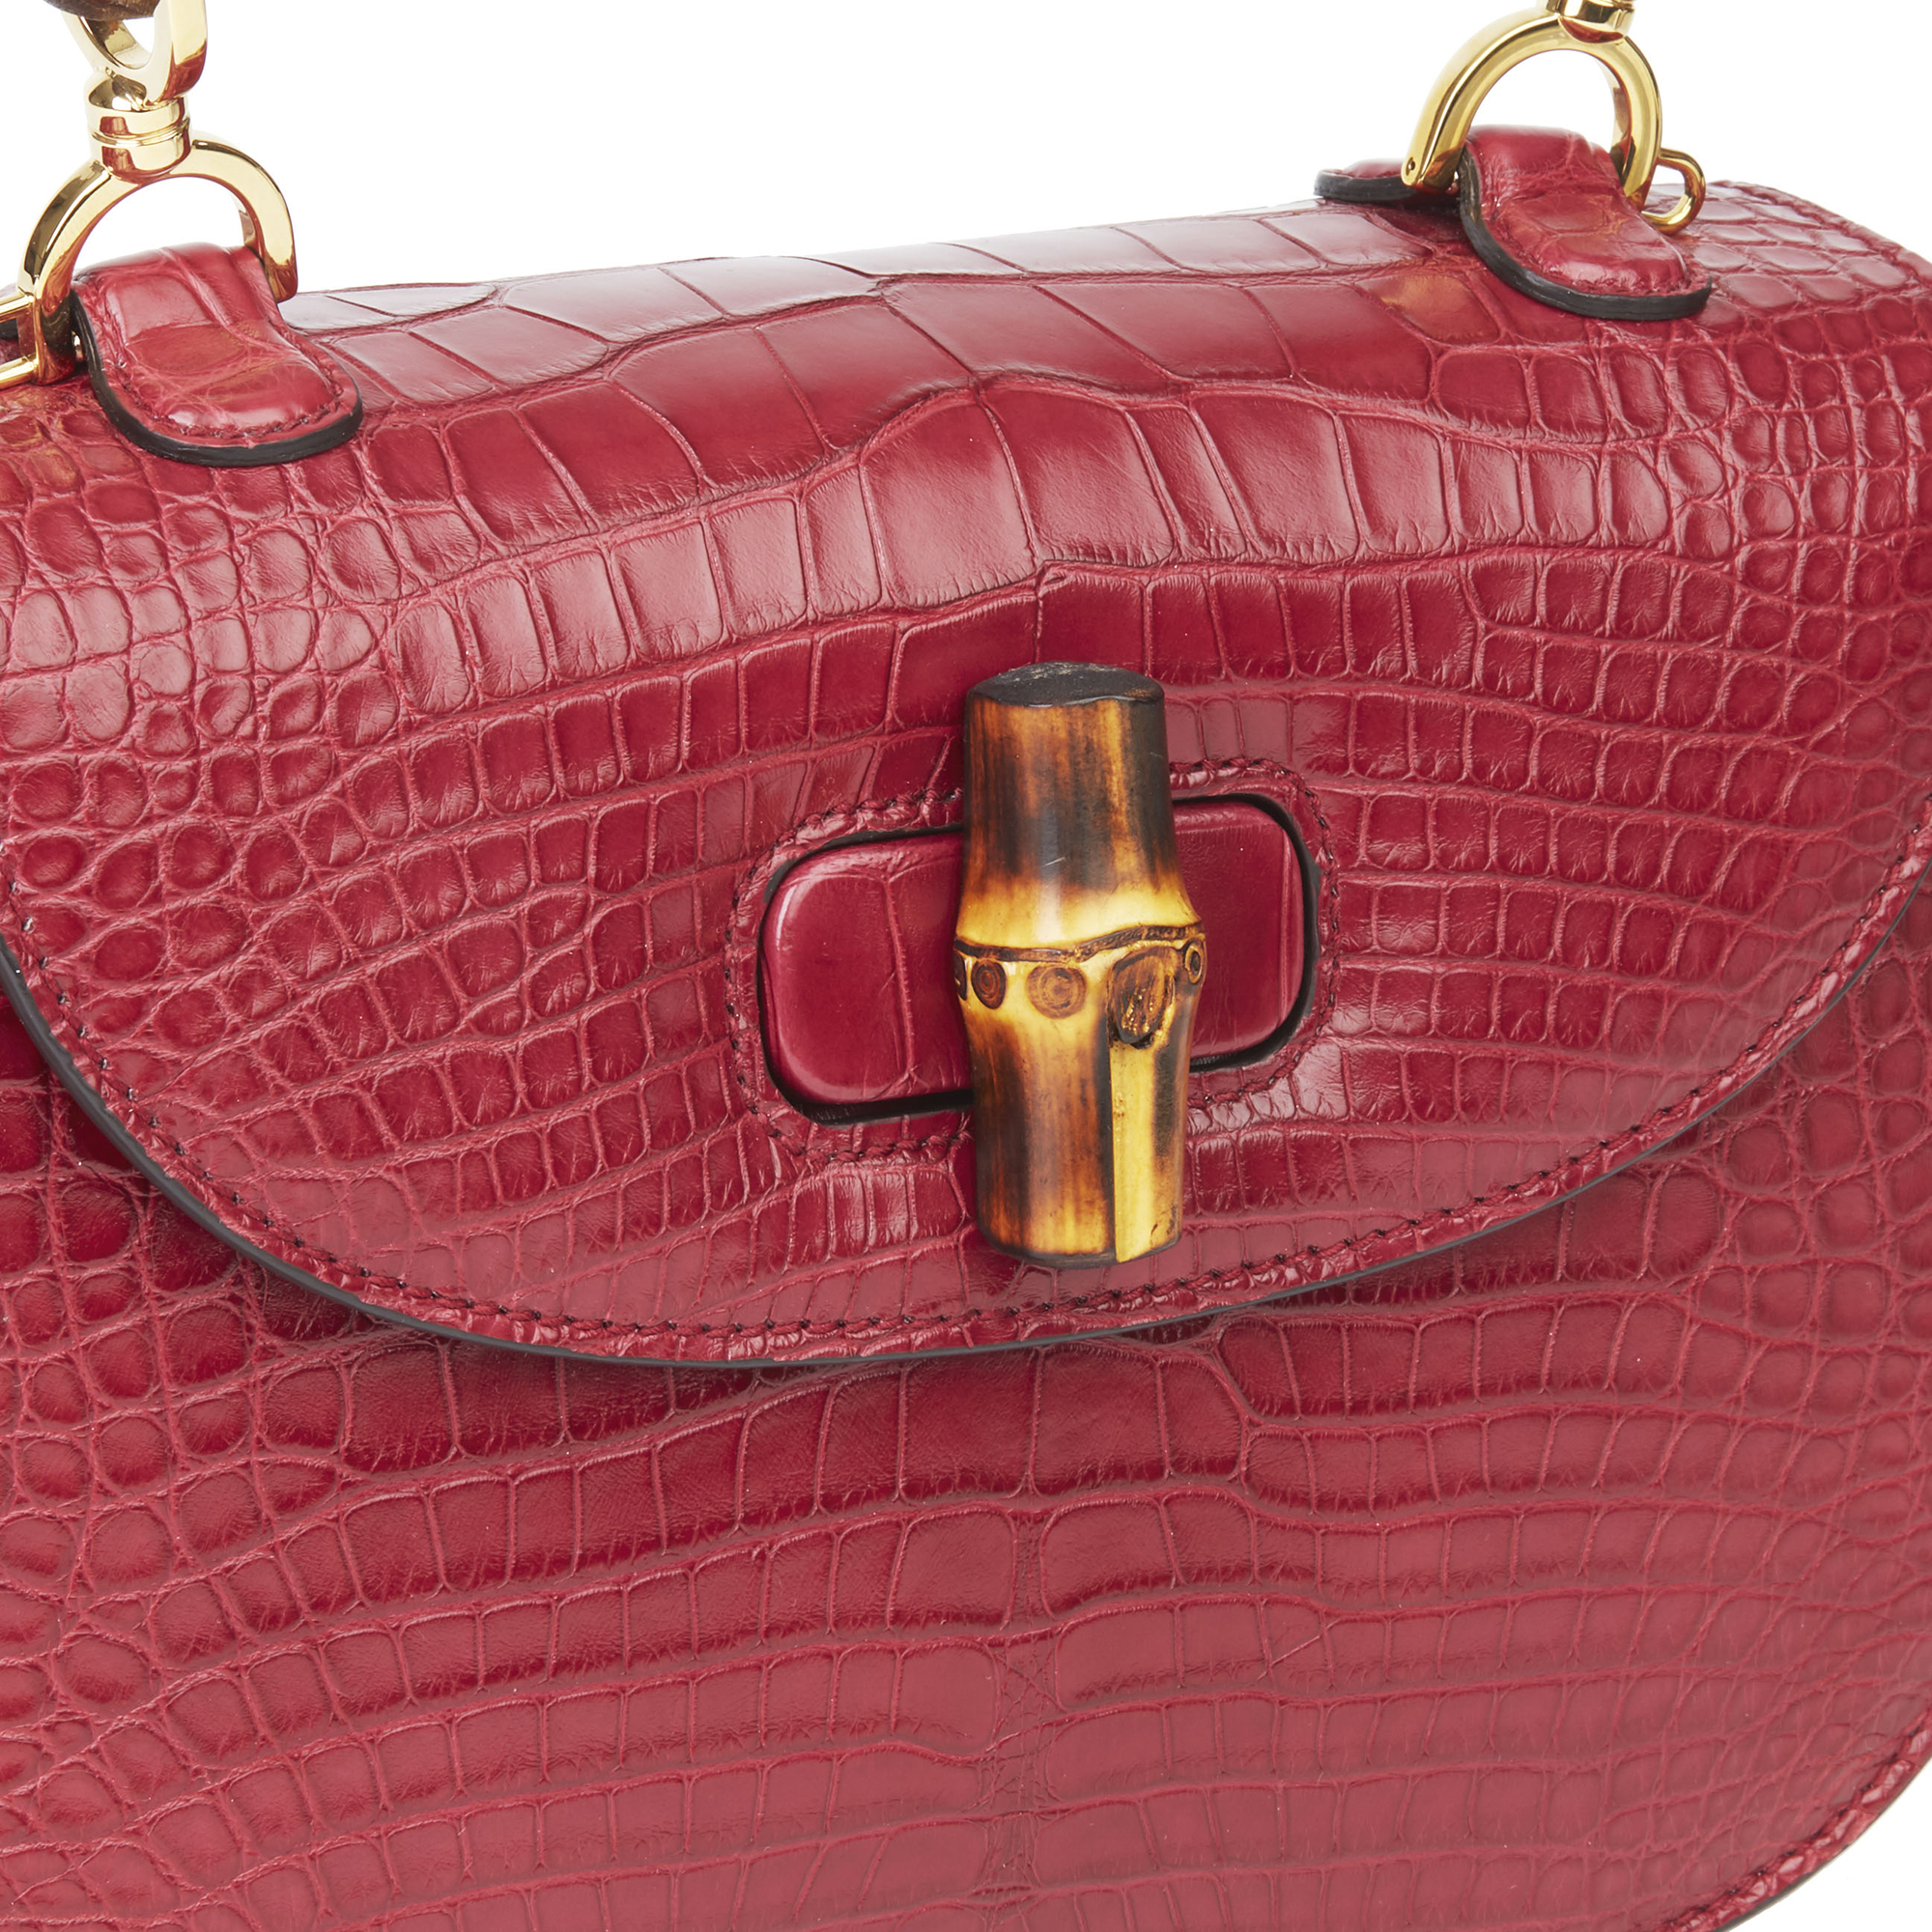 Gucci Burgundy Alligator Leather Bamboo Classic Top Handle - Image 8 of 12